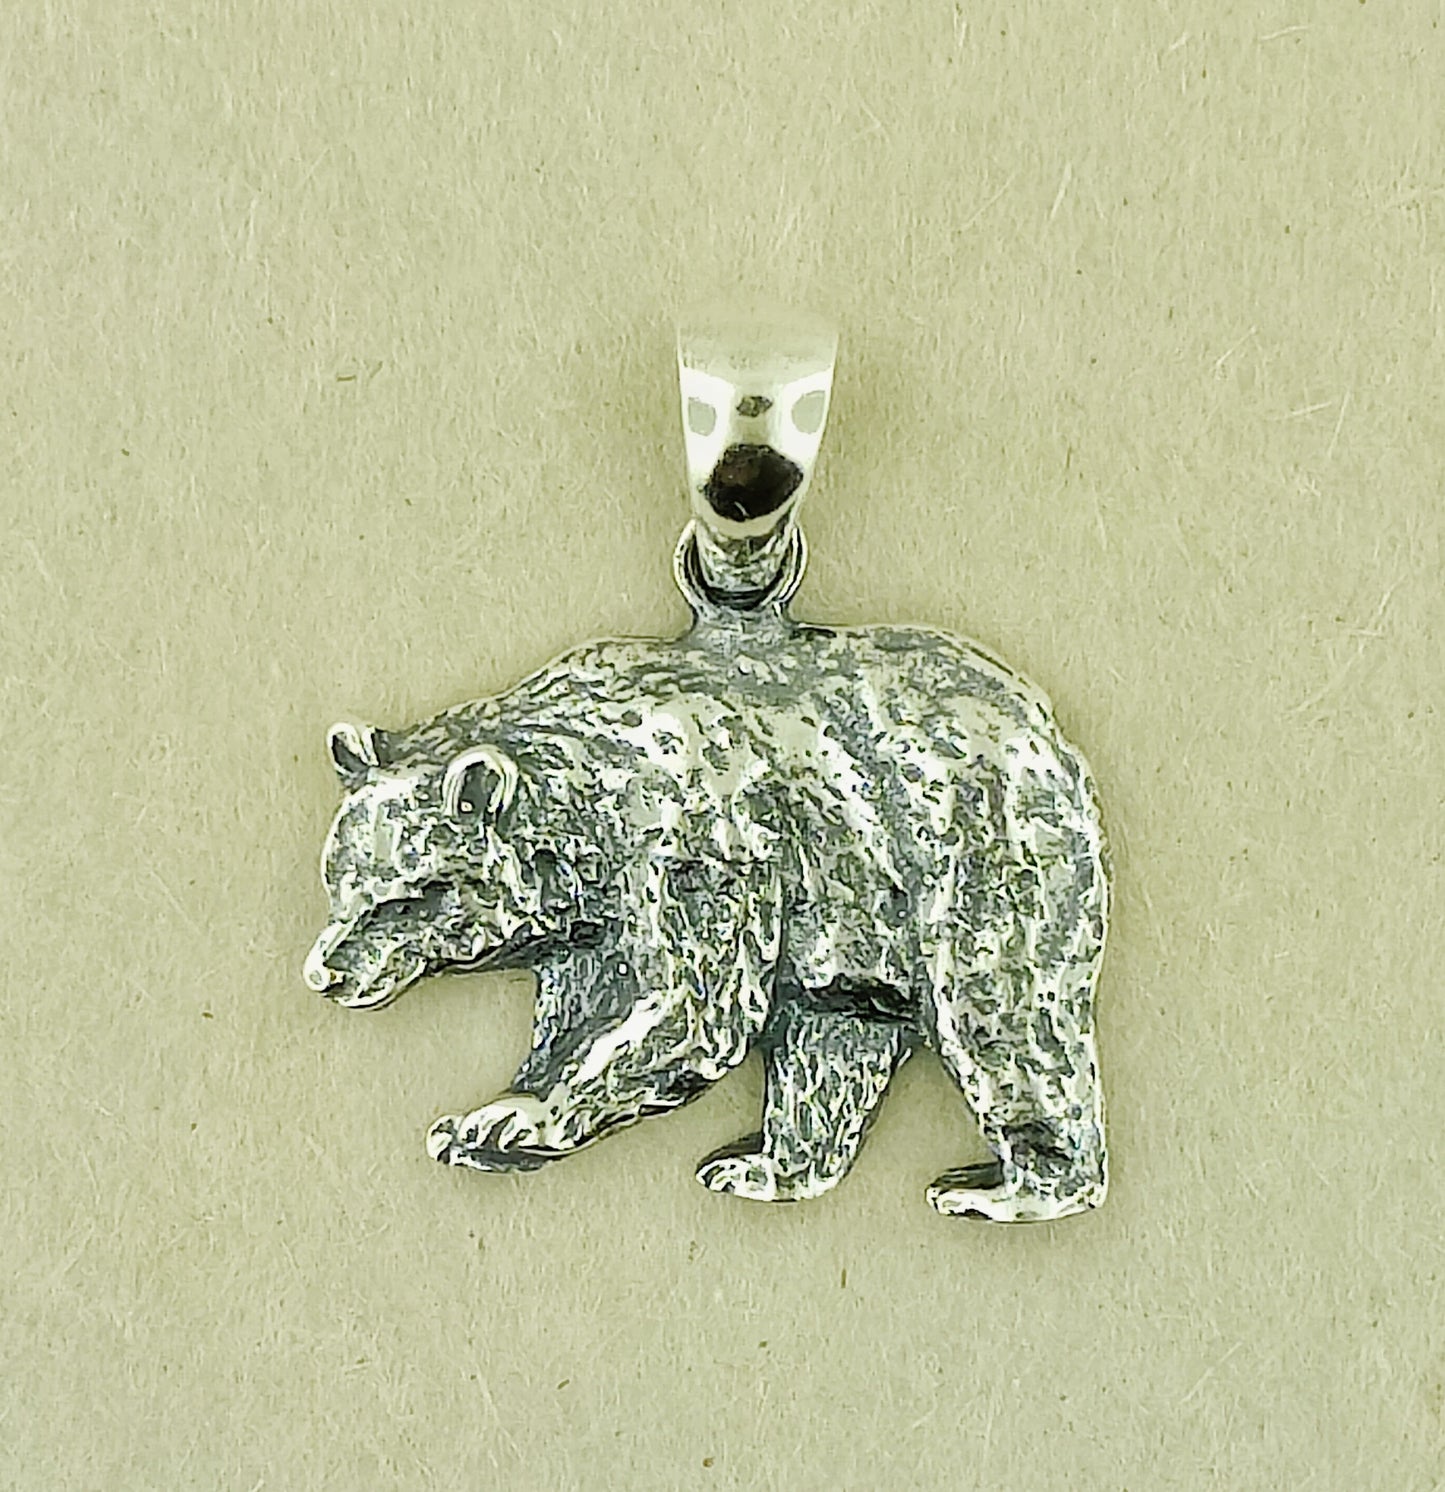 Bear Charm Pendant in 925 Silver, Grizzly Bear Pendant Charm Necklace, Bear Totem Pendant, Silver Bear Pendant, Bear Jewelry In Sterling Silver, Bear Totem Pendant, Silver Animal Pendants, Silver Bear Charm Pendant, Silver Bear Necklace